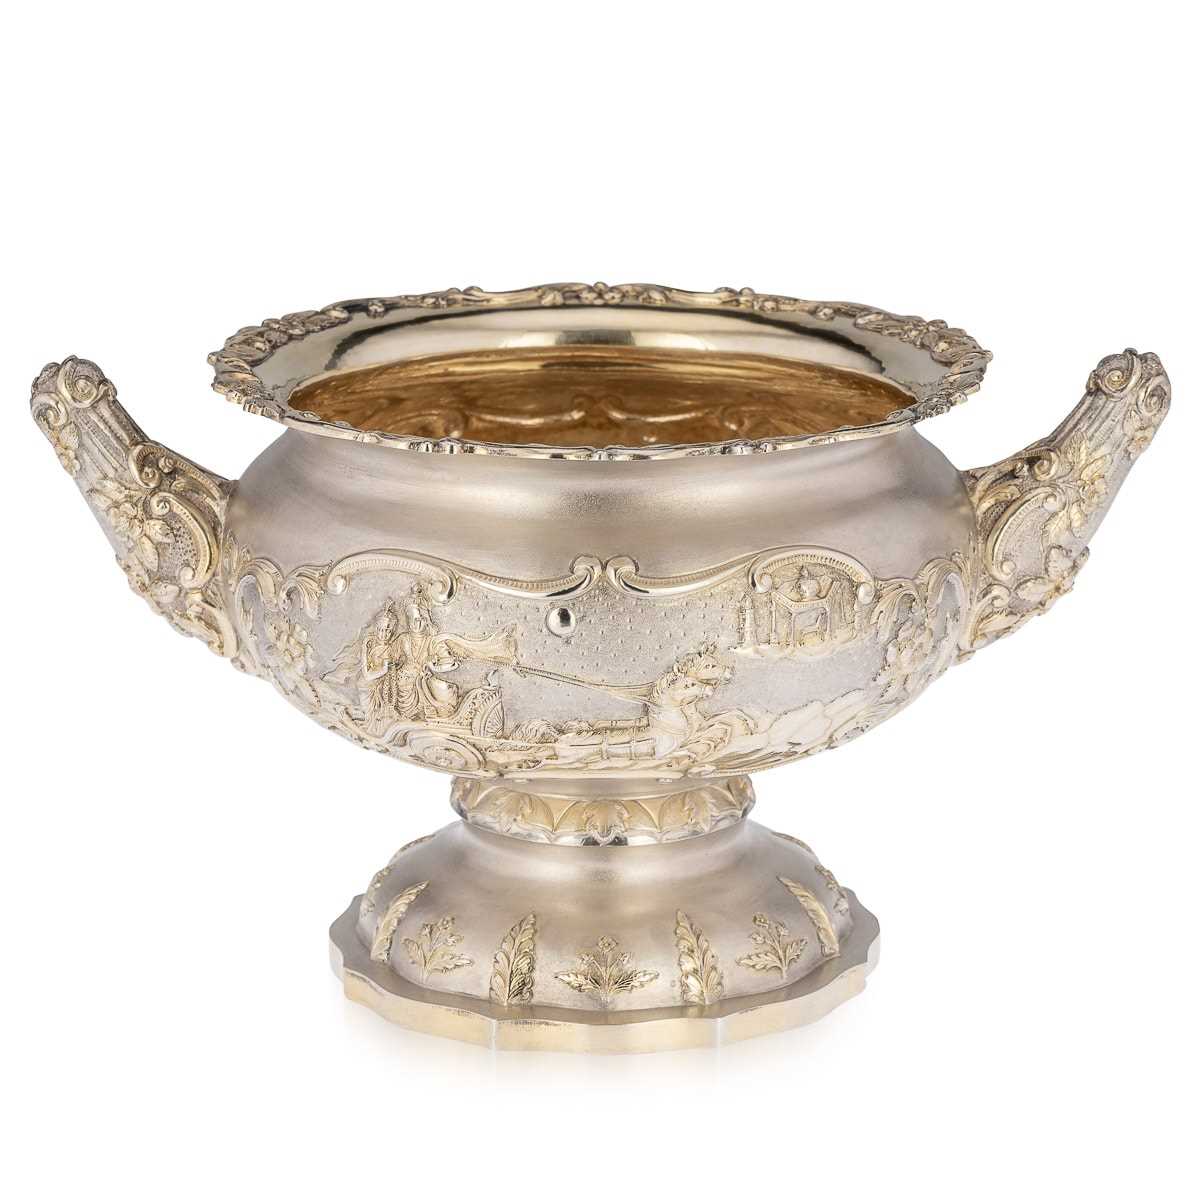 AN EARLY 20TH CENTURY INDIAN SOLID SILVER BOWL, CALCUTTA c.1910